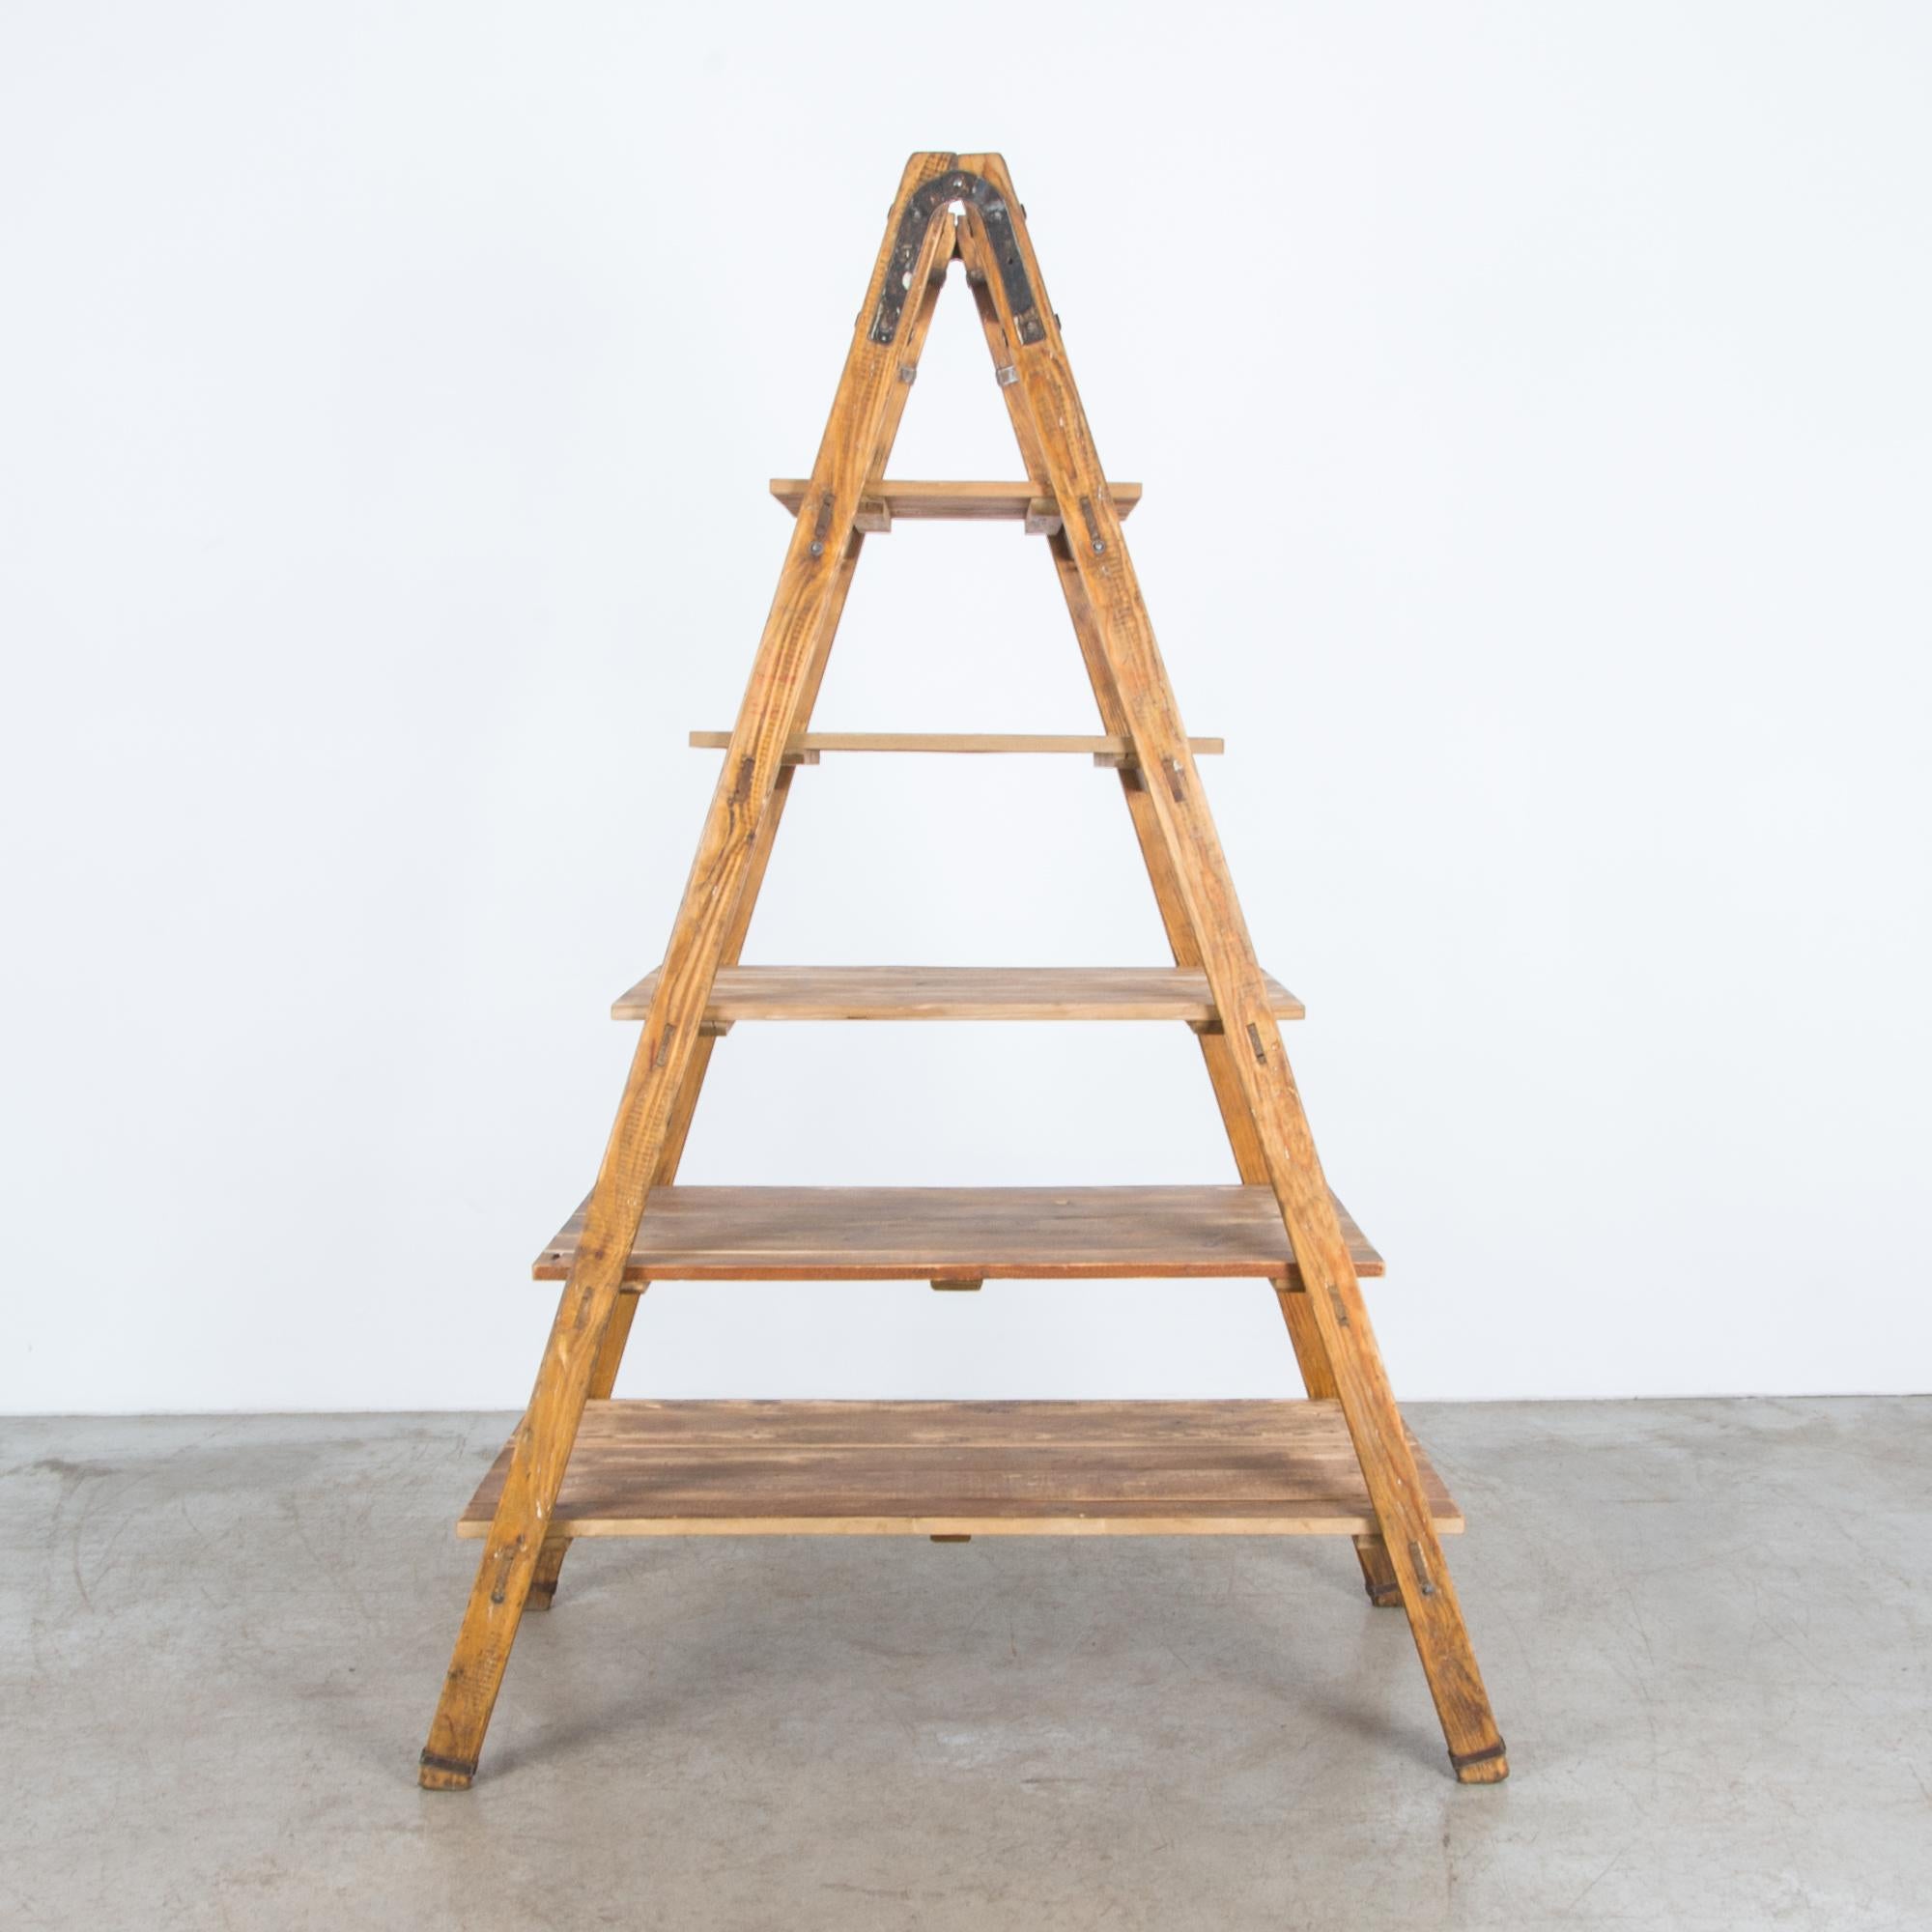 A vintage ladder from France, circa 1940. Originally used for fruit picking, this ladder is reinforced with durable iron hardware, enhancing and strengthening the rustic wooden construction. Cleaned and refreshed in our atelier, the ladder rungs